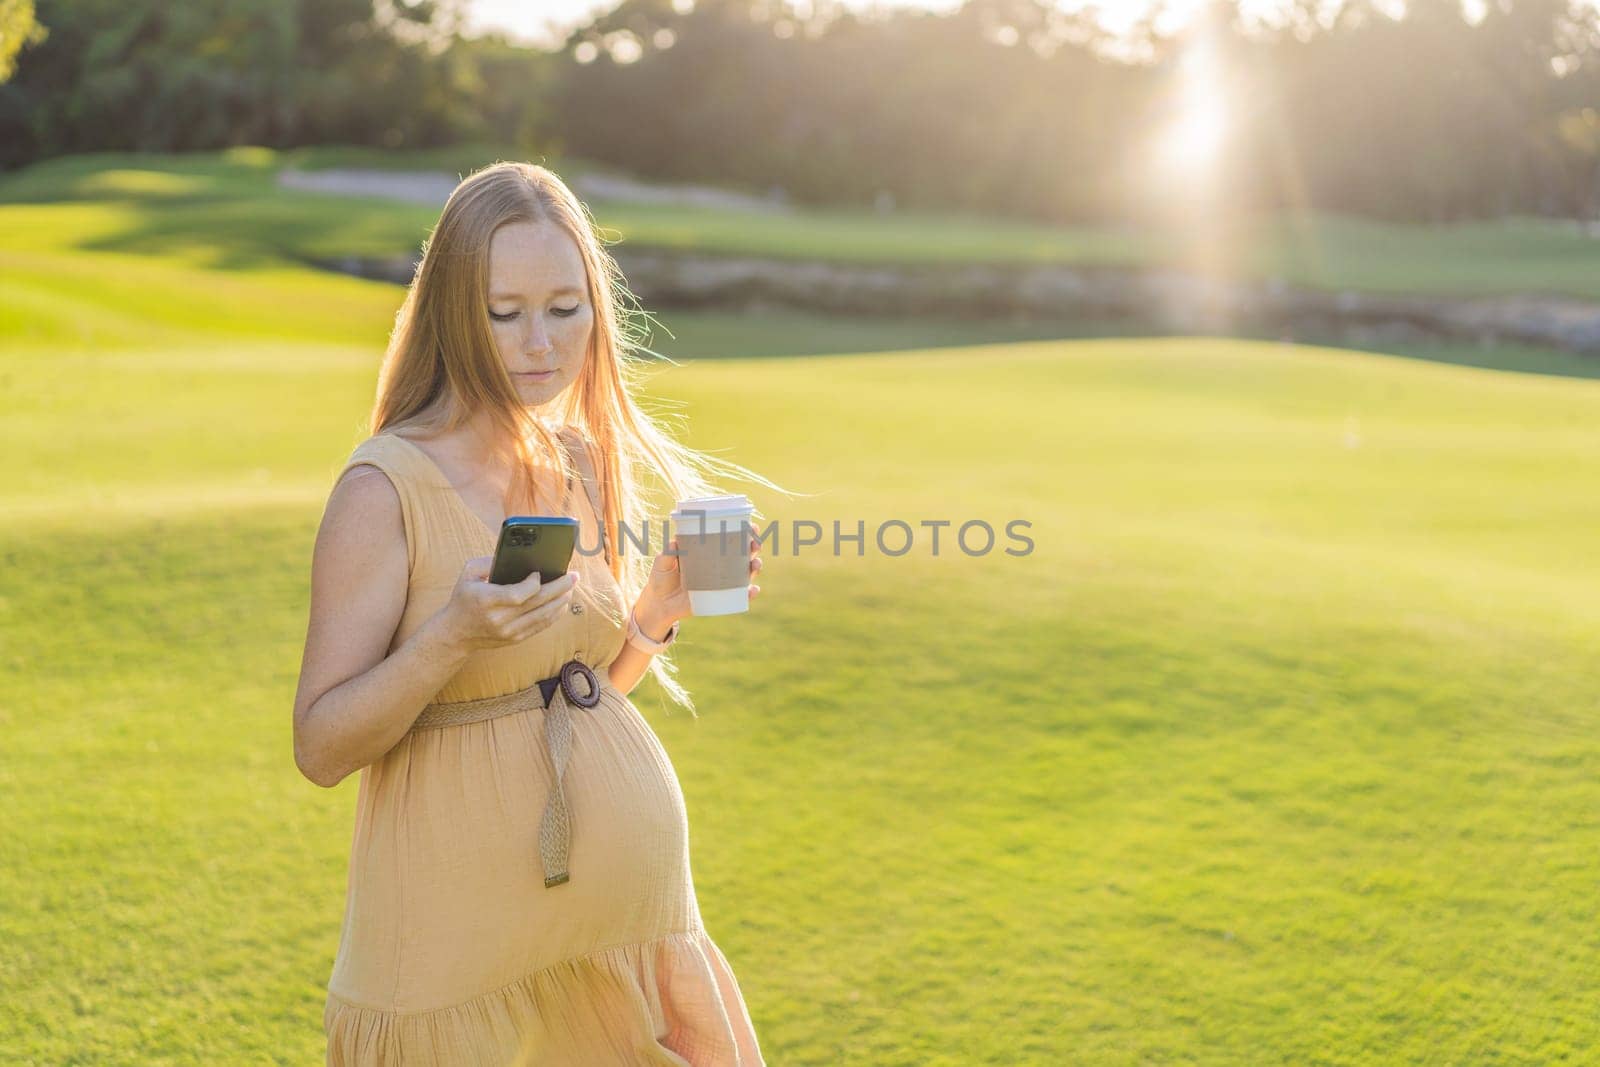 pregnant woman enjoys a cup of coffee outdoors, blending the simple pleasures of nature with the comforting warmth of a beverage during her pregnancy by galitskaya